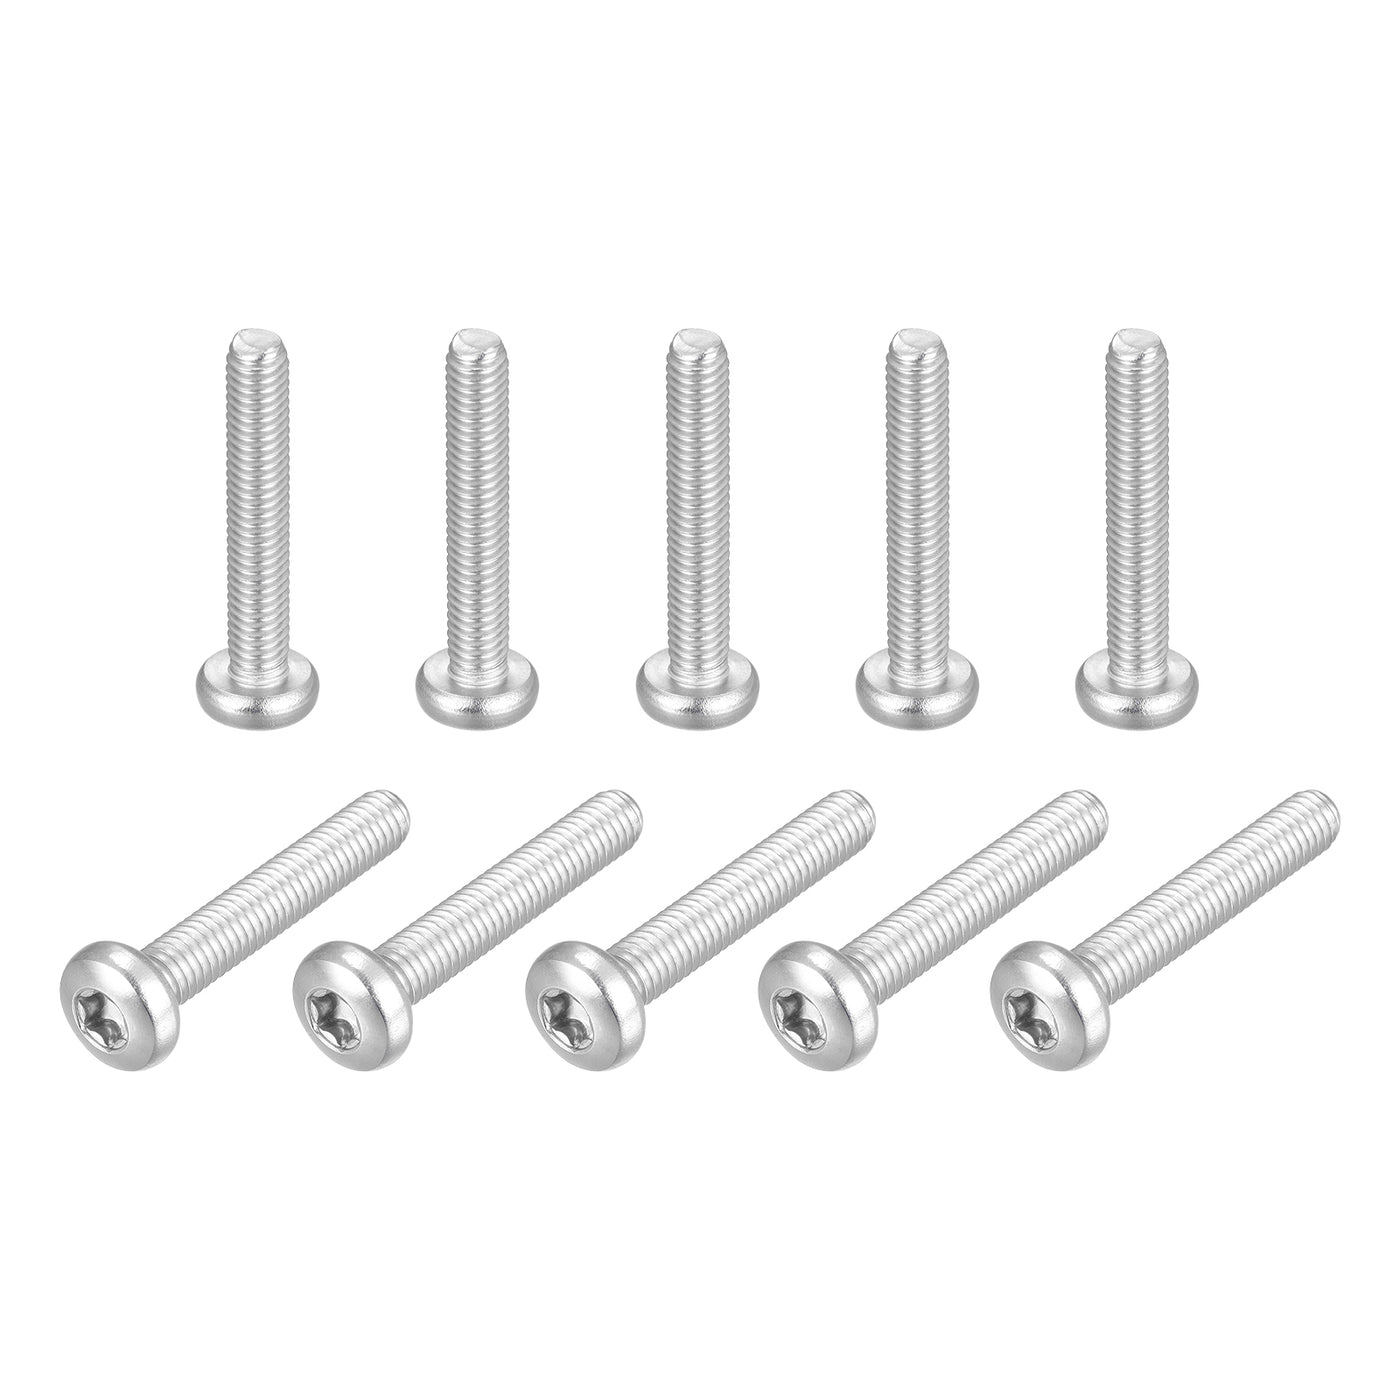 uxcell Uxcell M6x35mm Torx Security Machine Screws, 10pcs 316 Stainless Steel Pan Head Screw